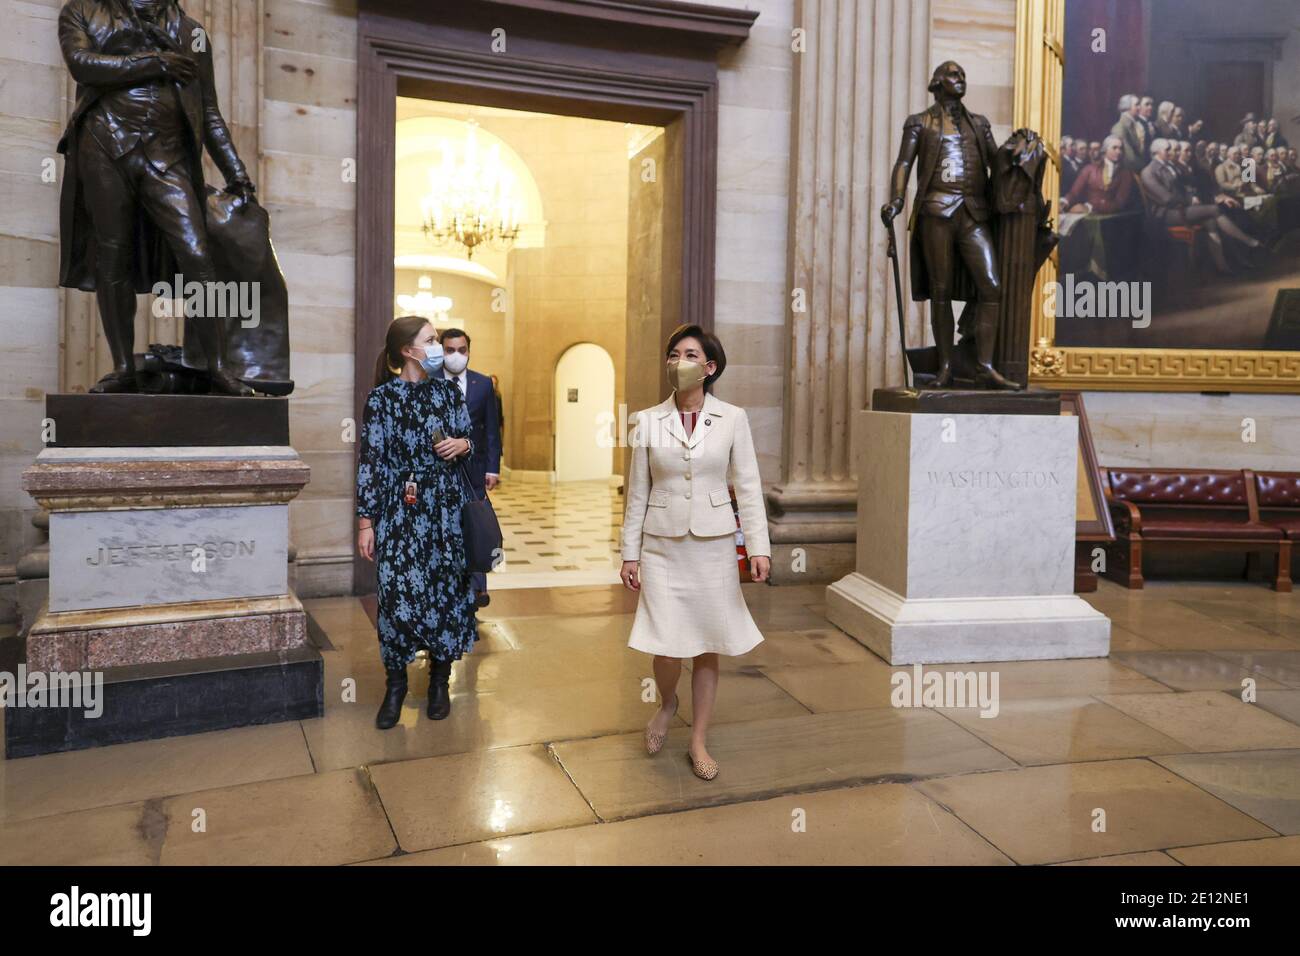 Washington, United States. 03rd Jan, 2021. Representative-elect Young Kim (R-CA) (R) walks in the US Capitol on Sunday, January 3, 2021 in Washington, DC. Both chambers are holding rare Sunday sessions to open the new Congress on January 3, as the Constitution requires. Pool photo by Tasos Katopodis/UPI Credit: UPI/Alamy Live News Stock Photo